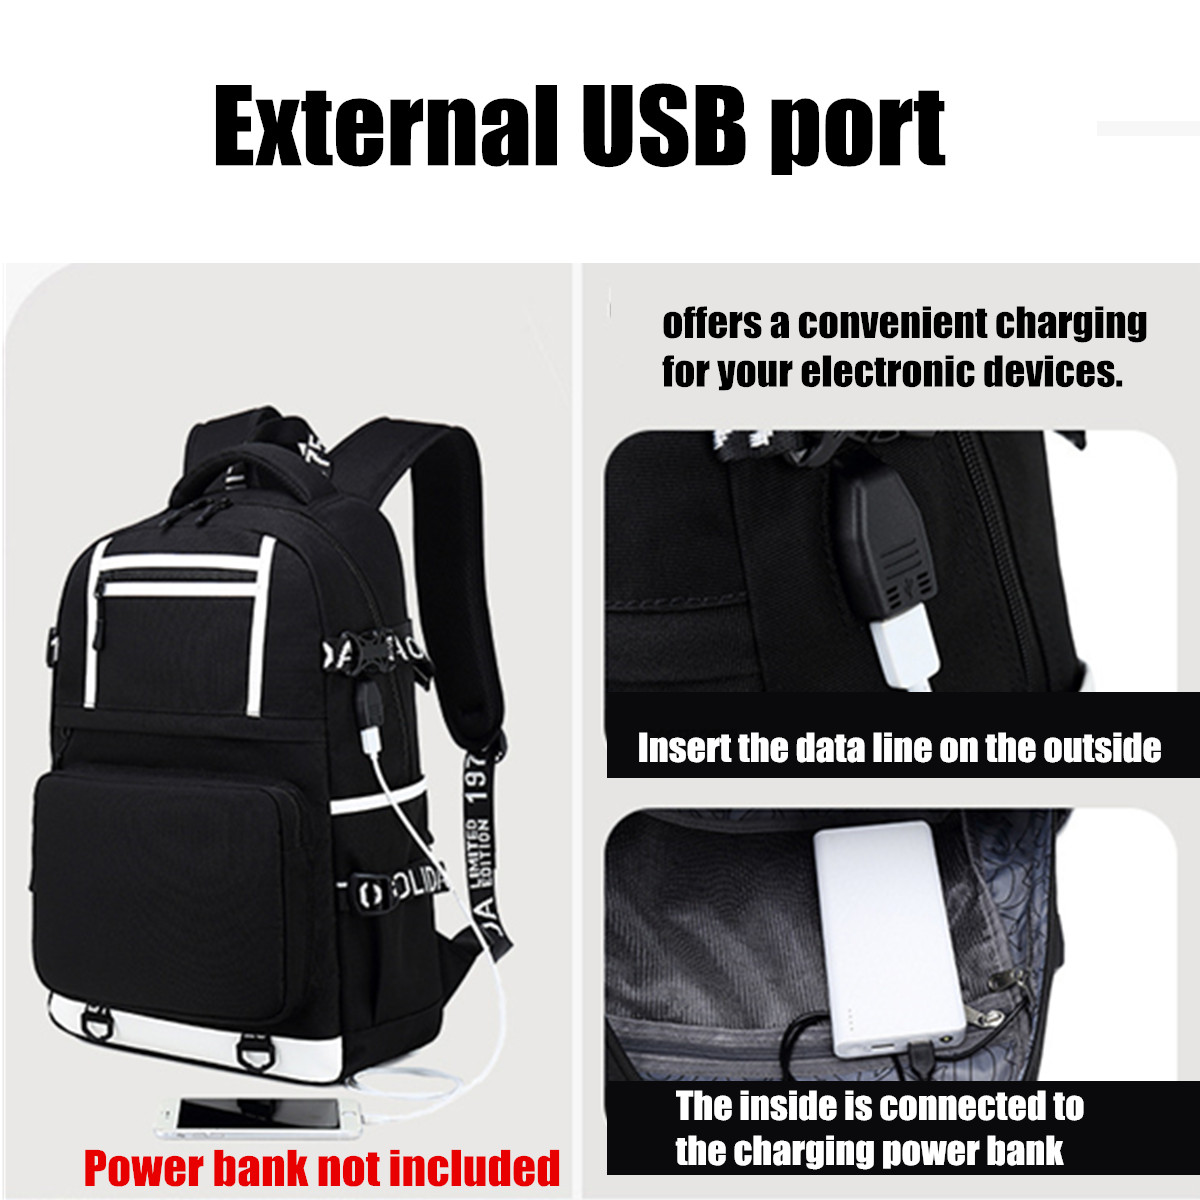 Oxford-Cloth-Waterproof-Laptop-Bag-Backpack-Travel-Bag-With-External-USB-Charging-Port-1509426-3